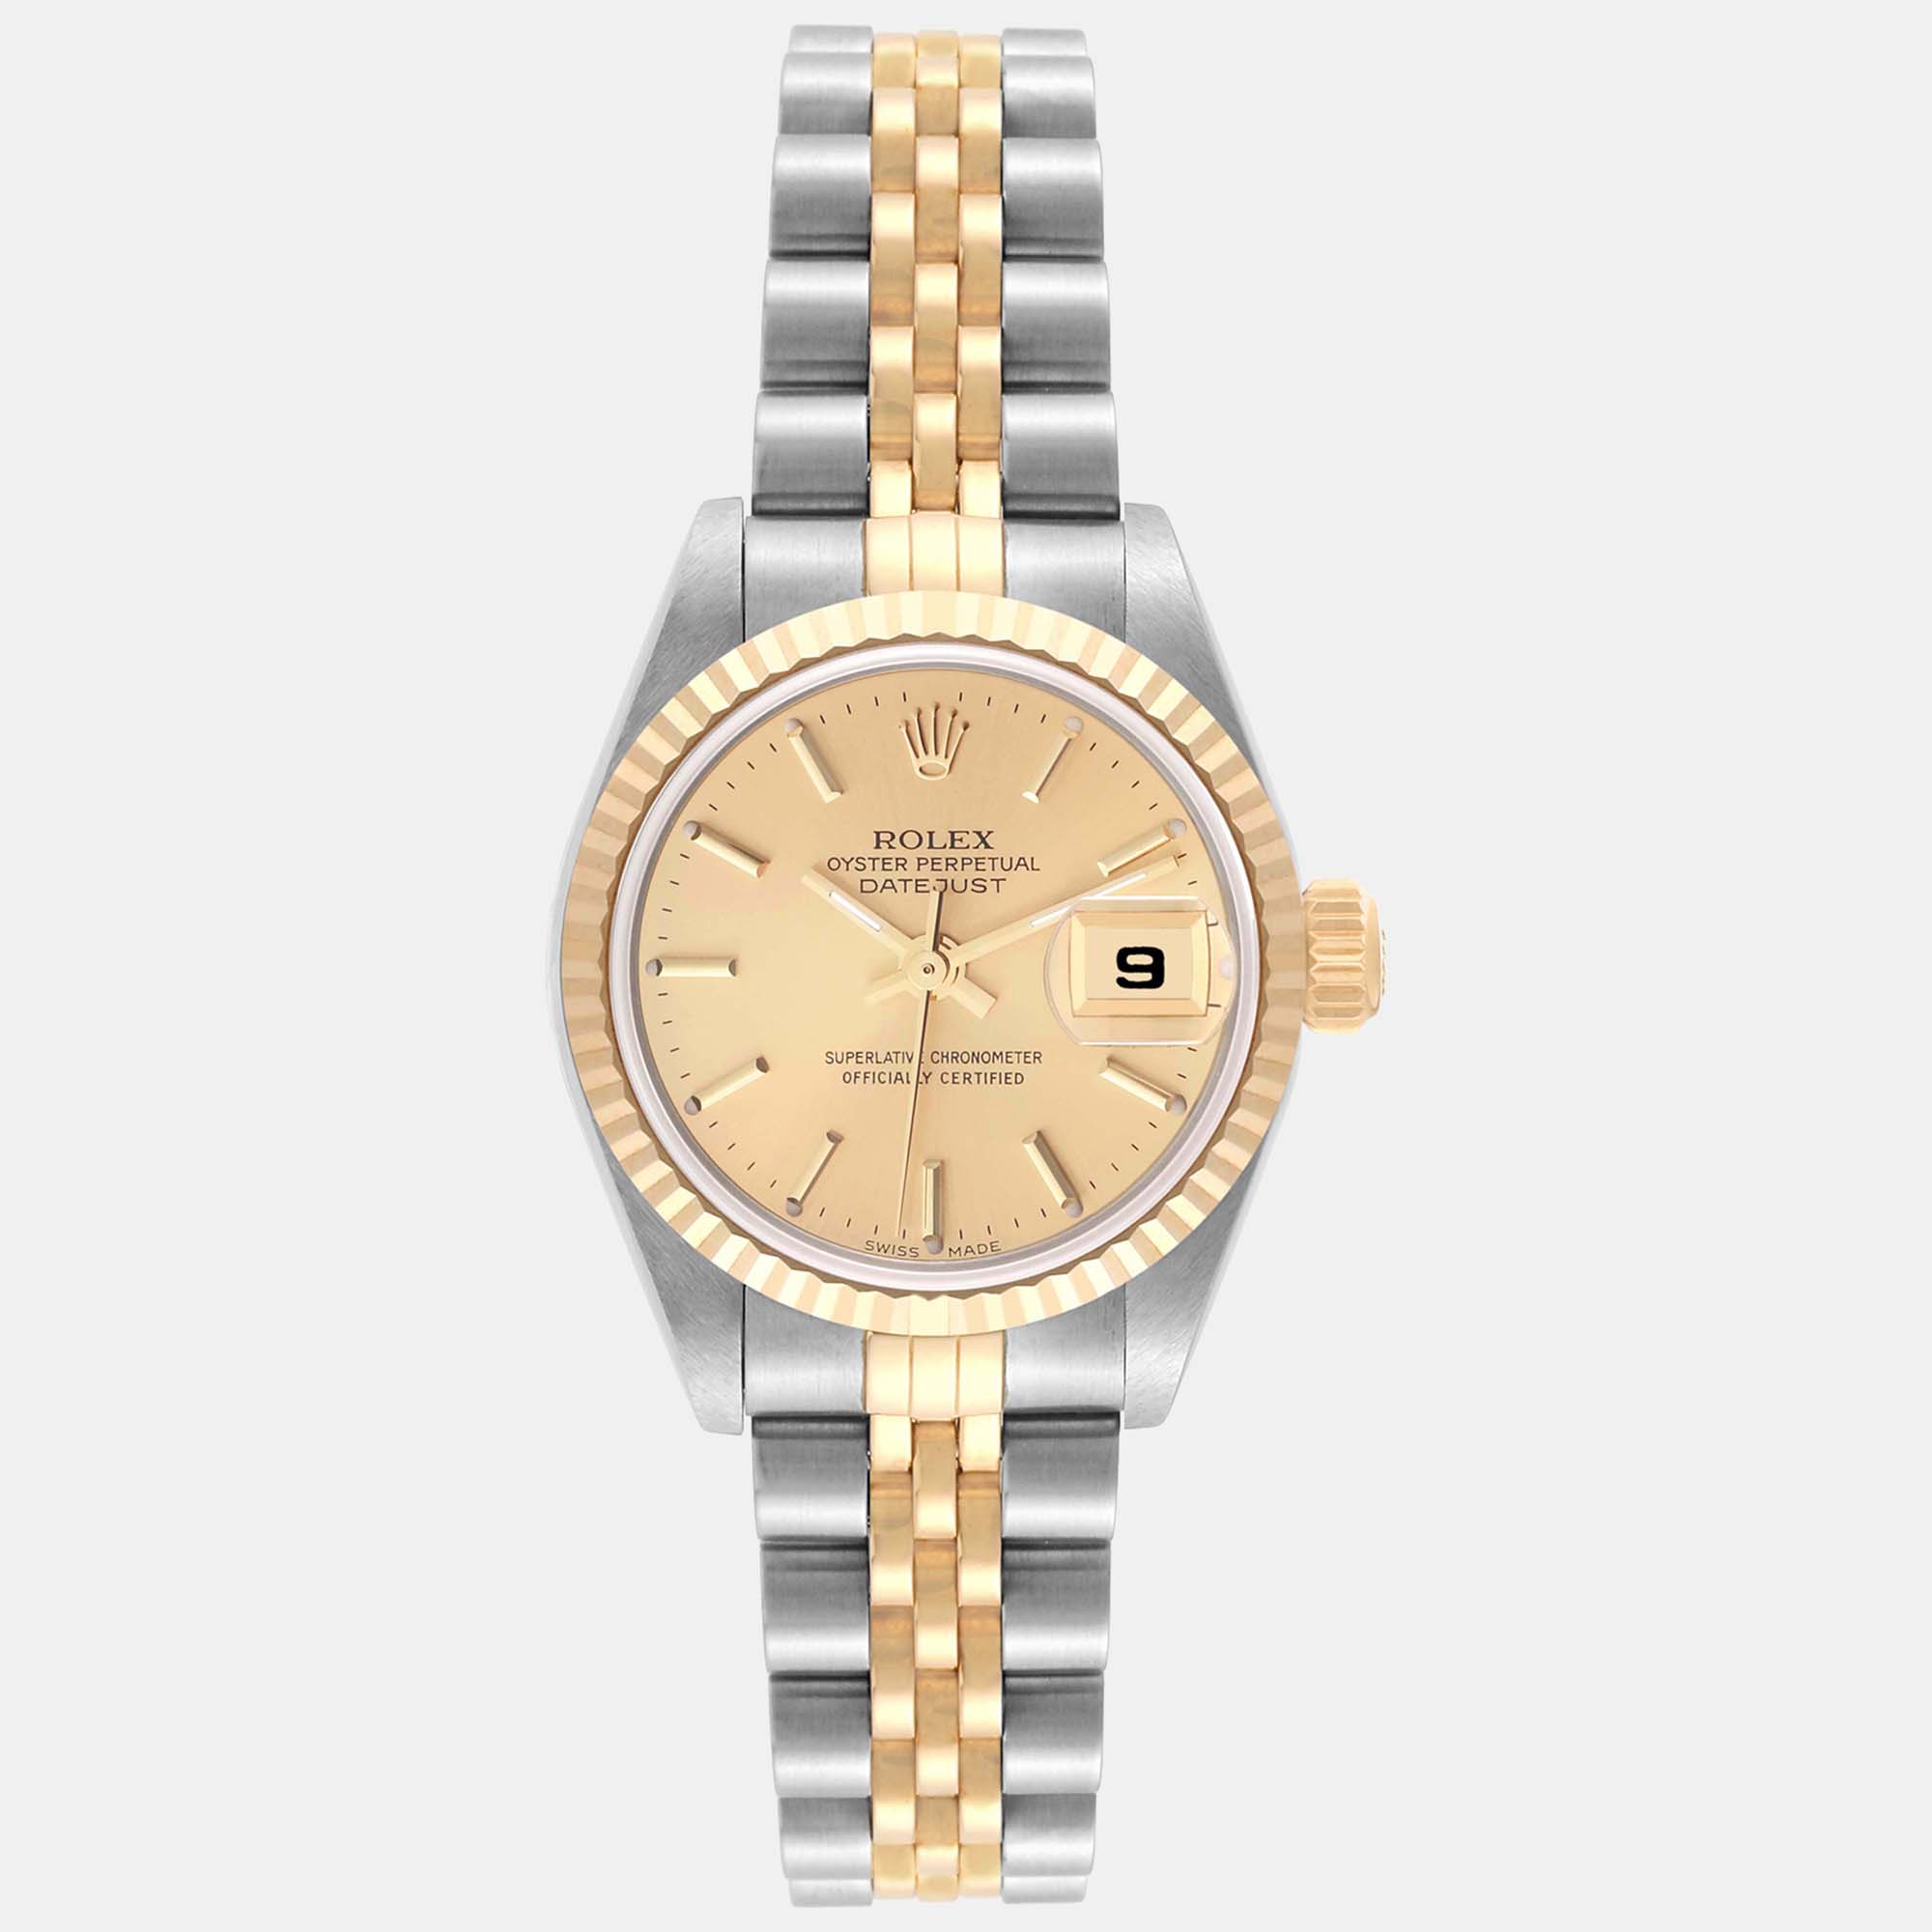 Rolex datejust steel yellow gold champagne dial ladies watch 26 mm